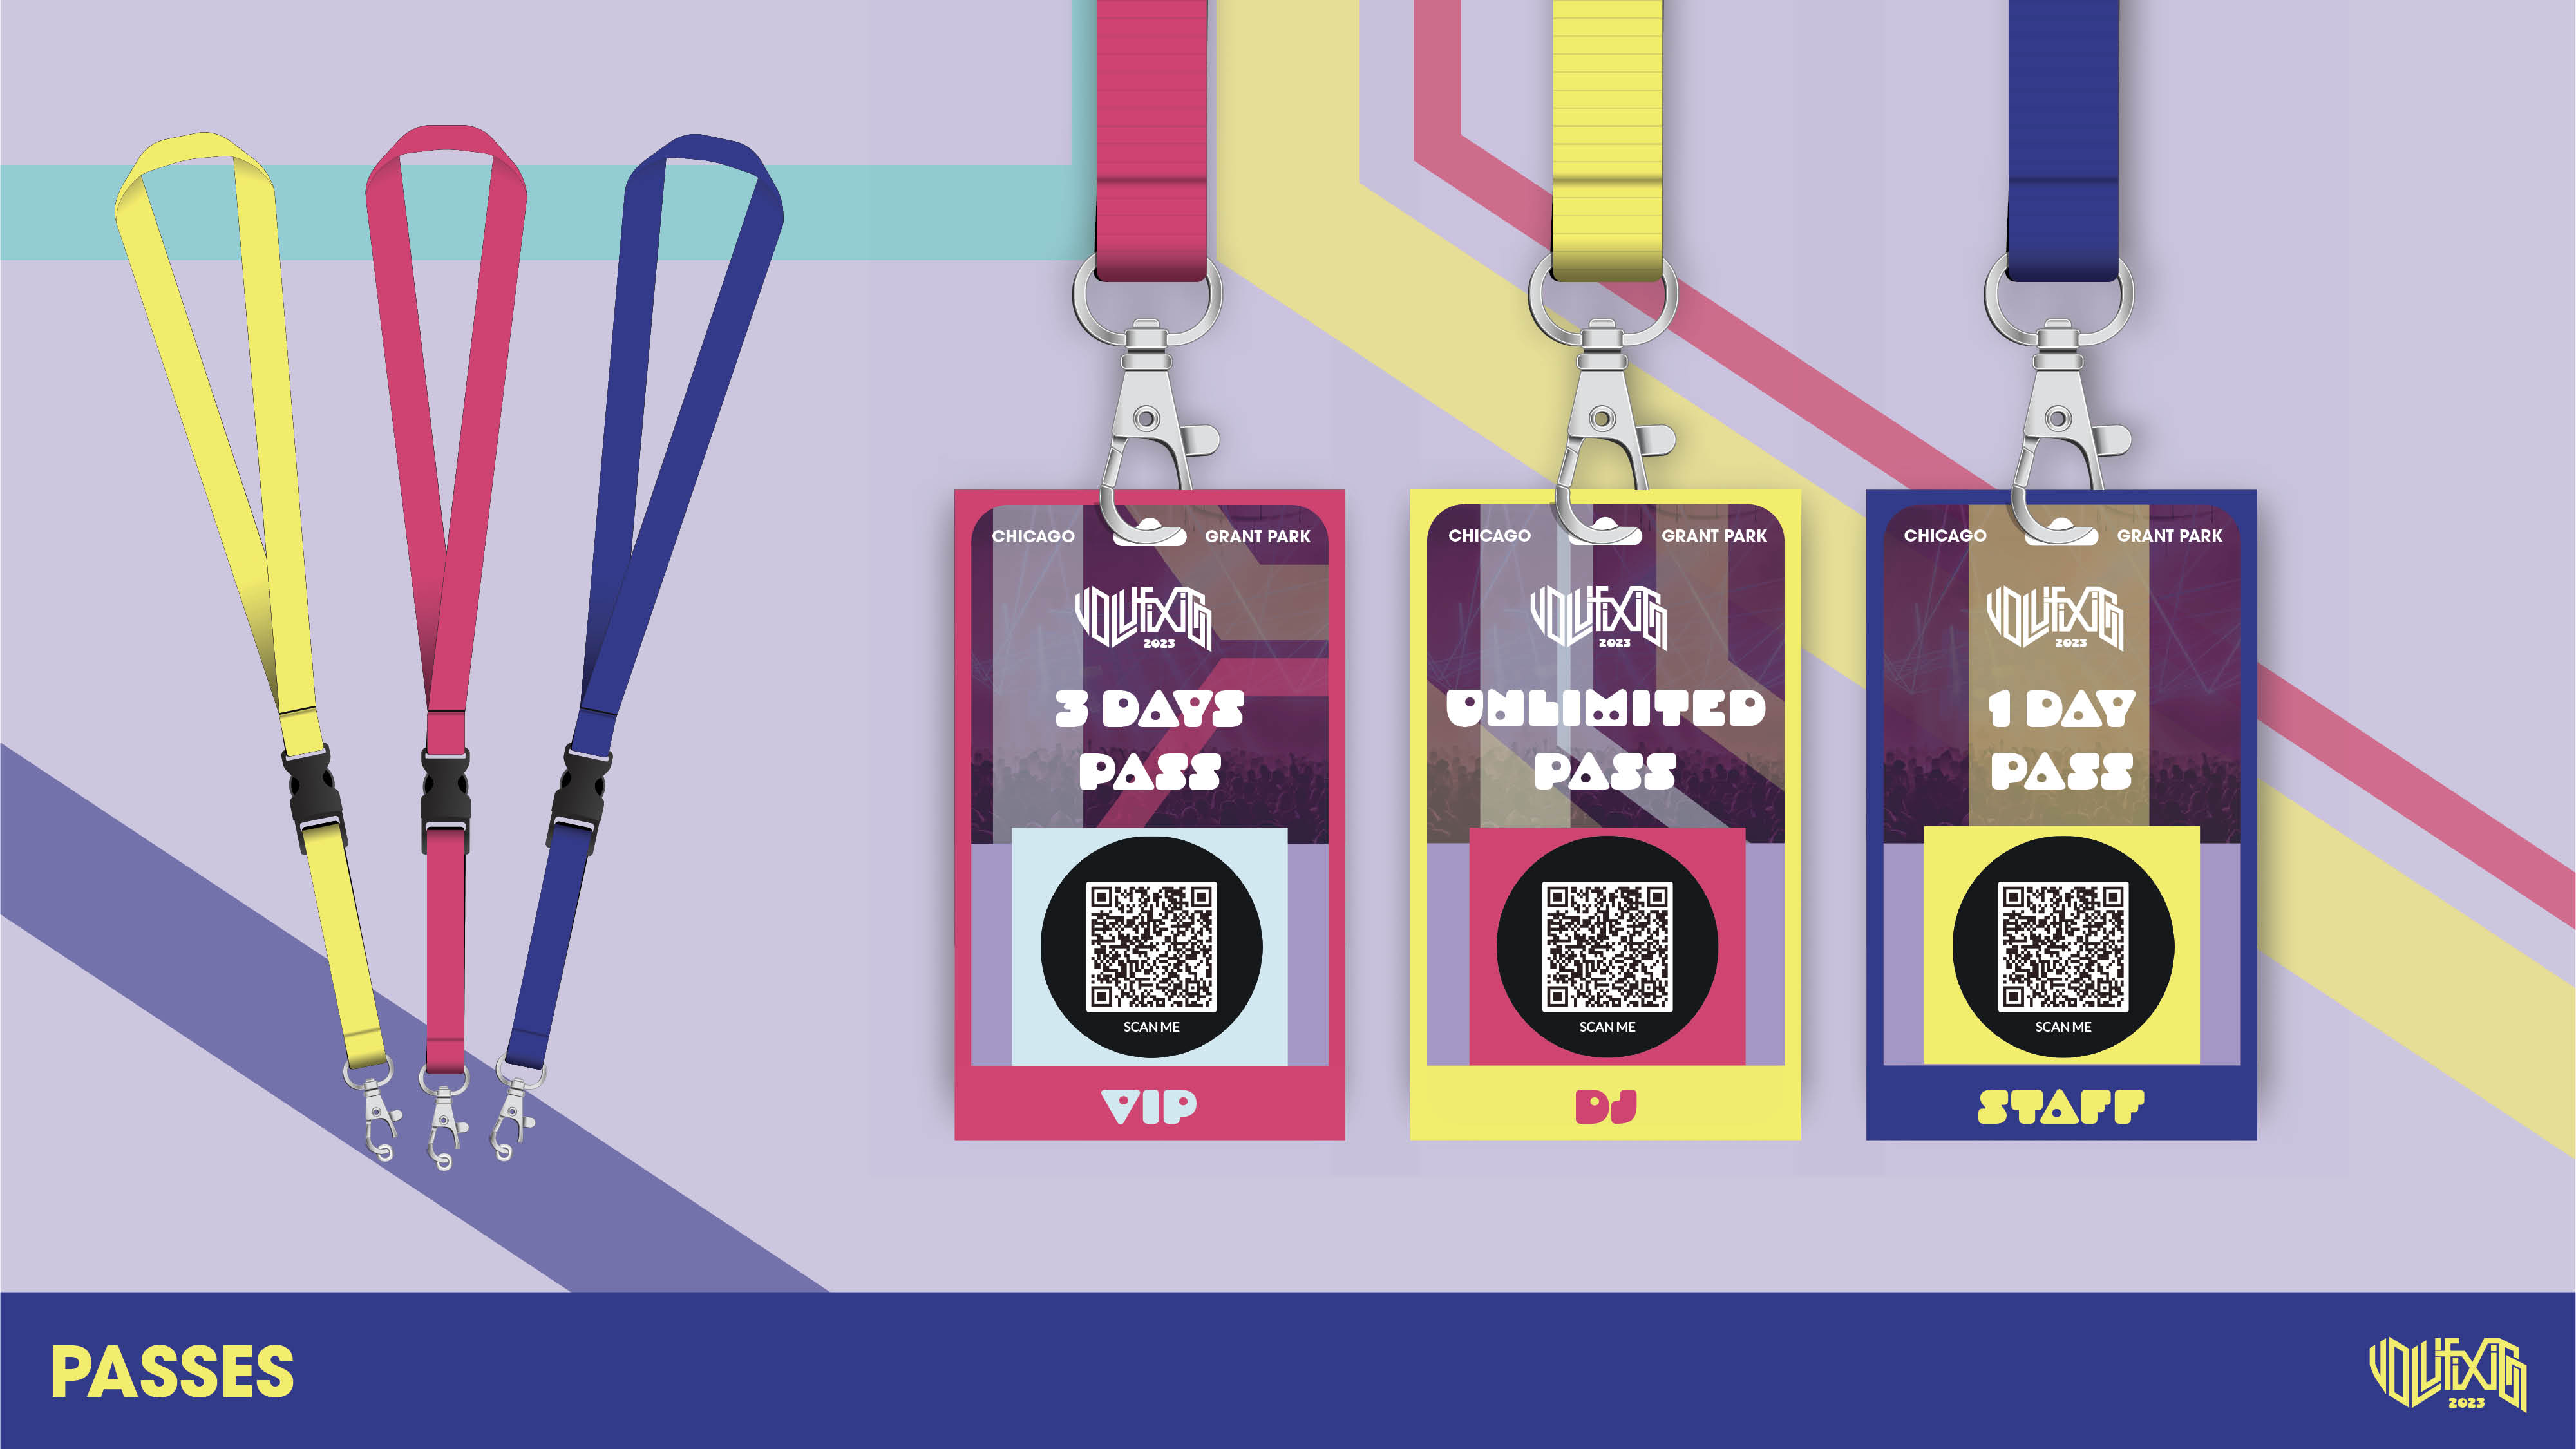 Volufixion badges for VIP, DJ, and Staff in pink, yellow, and blue color